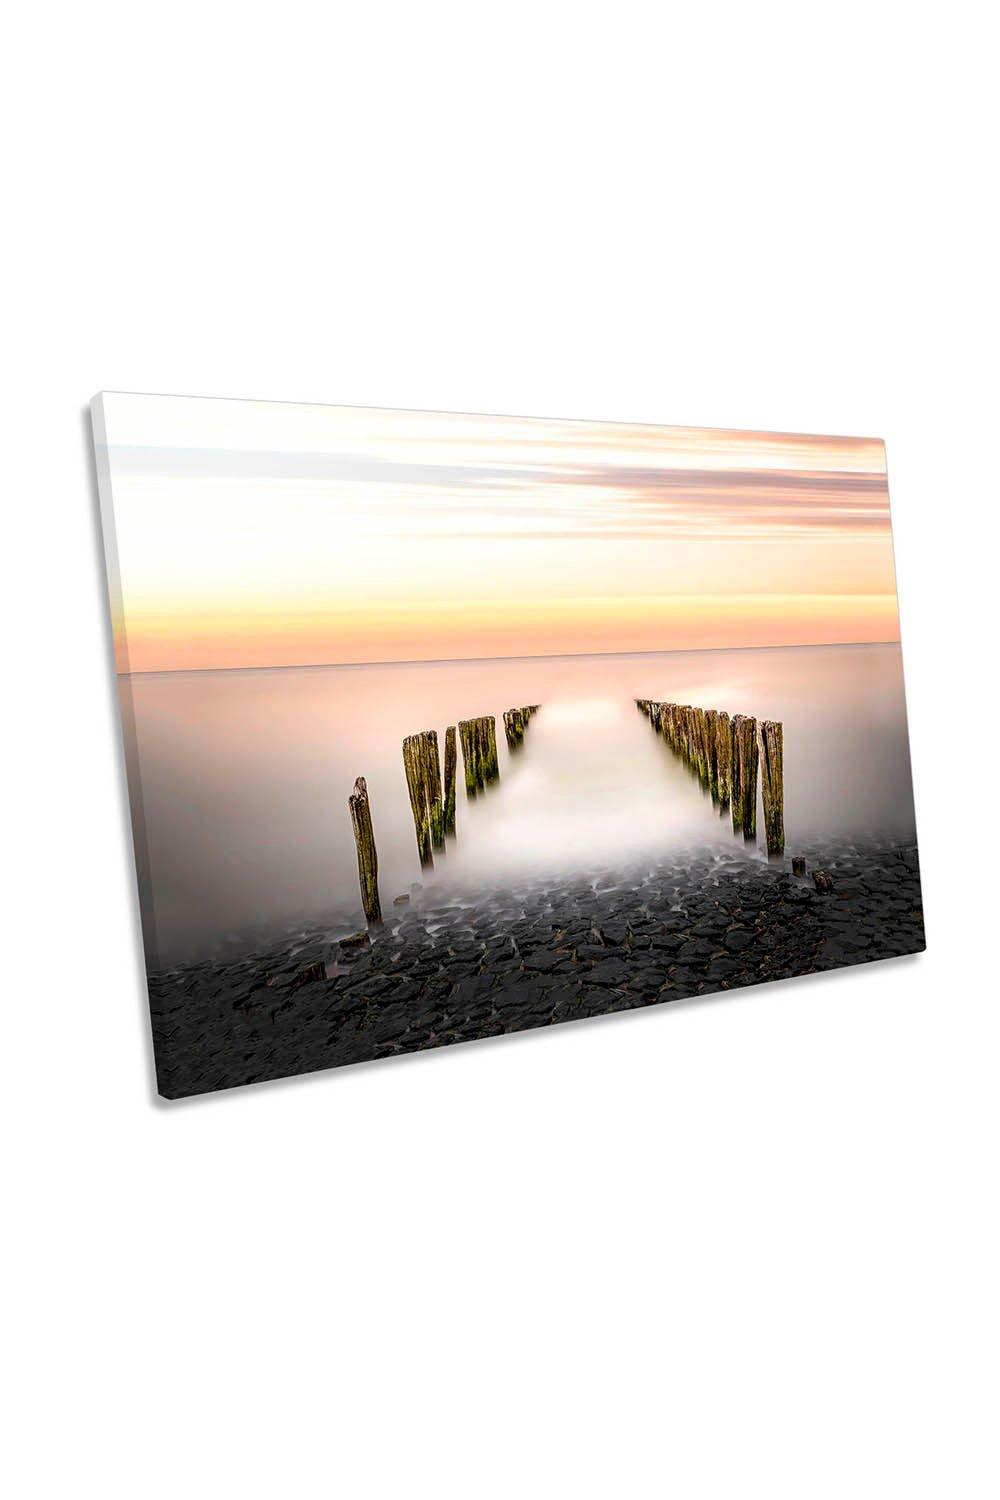 Breaking the Wave Seascape Sunset Orange Canvas Wall Art Picture Print